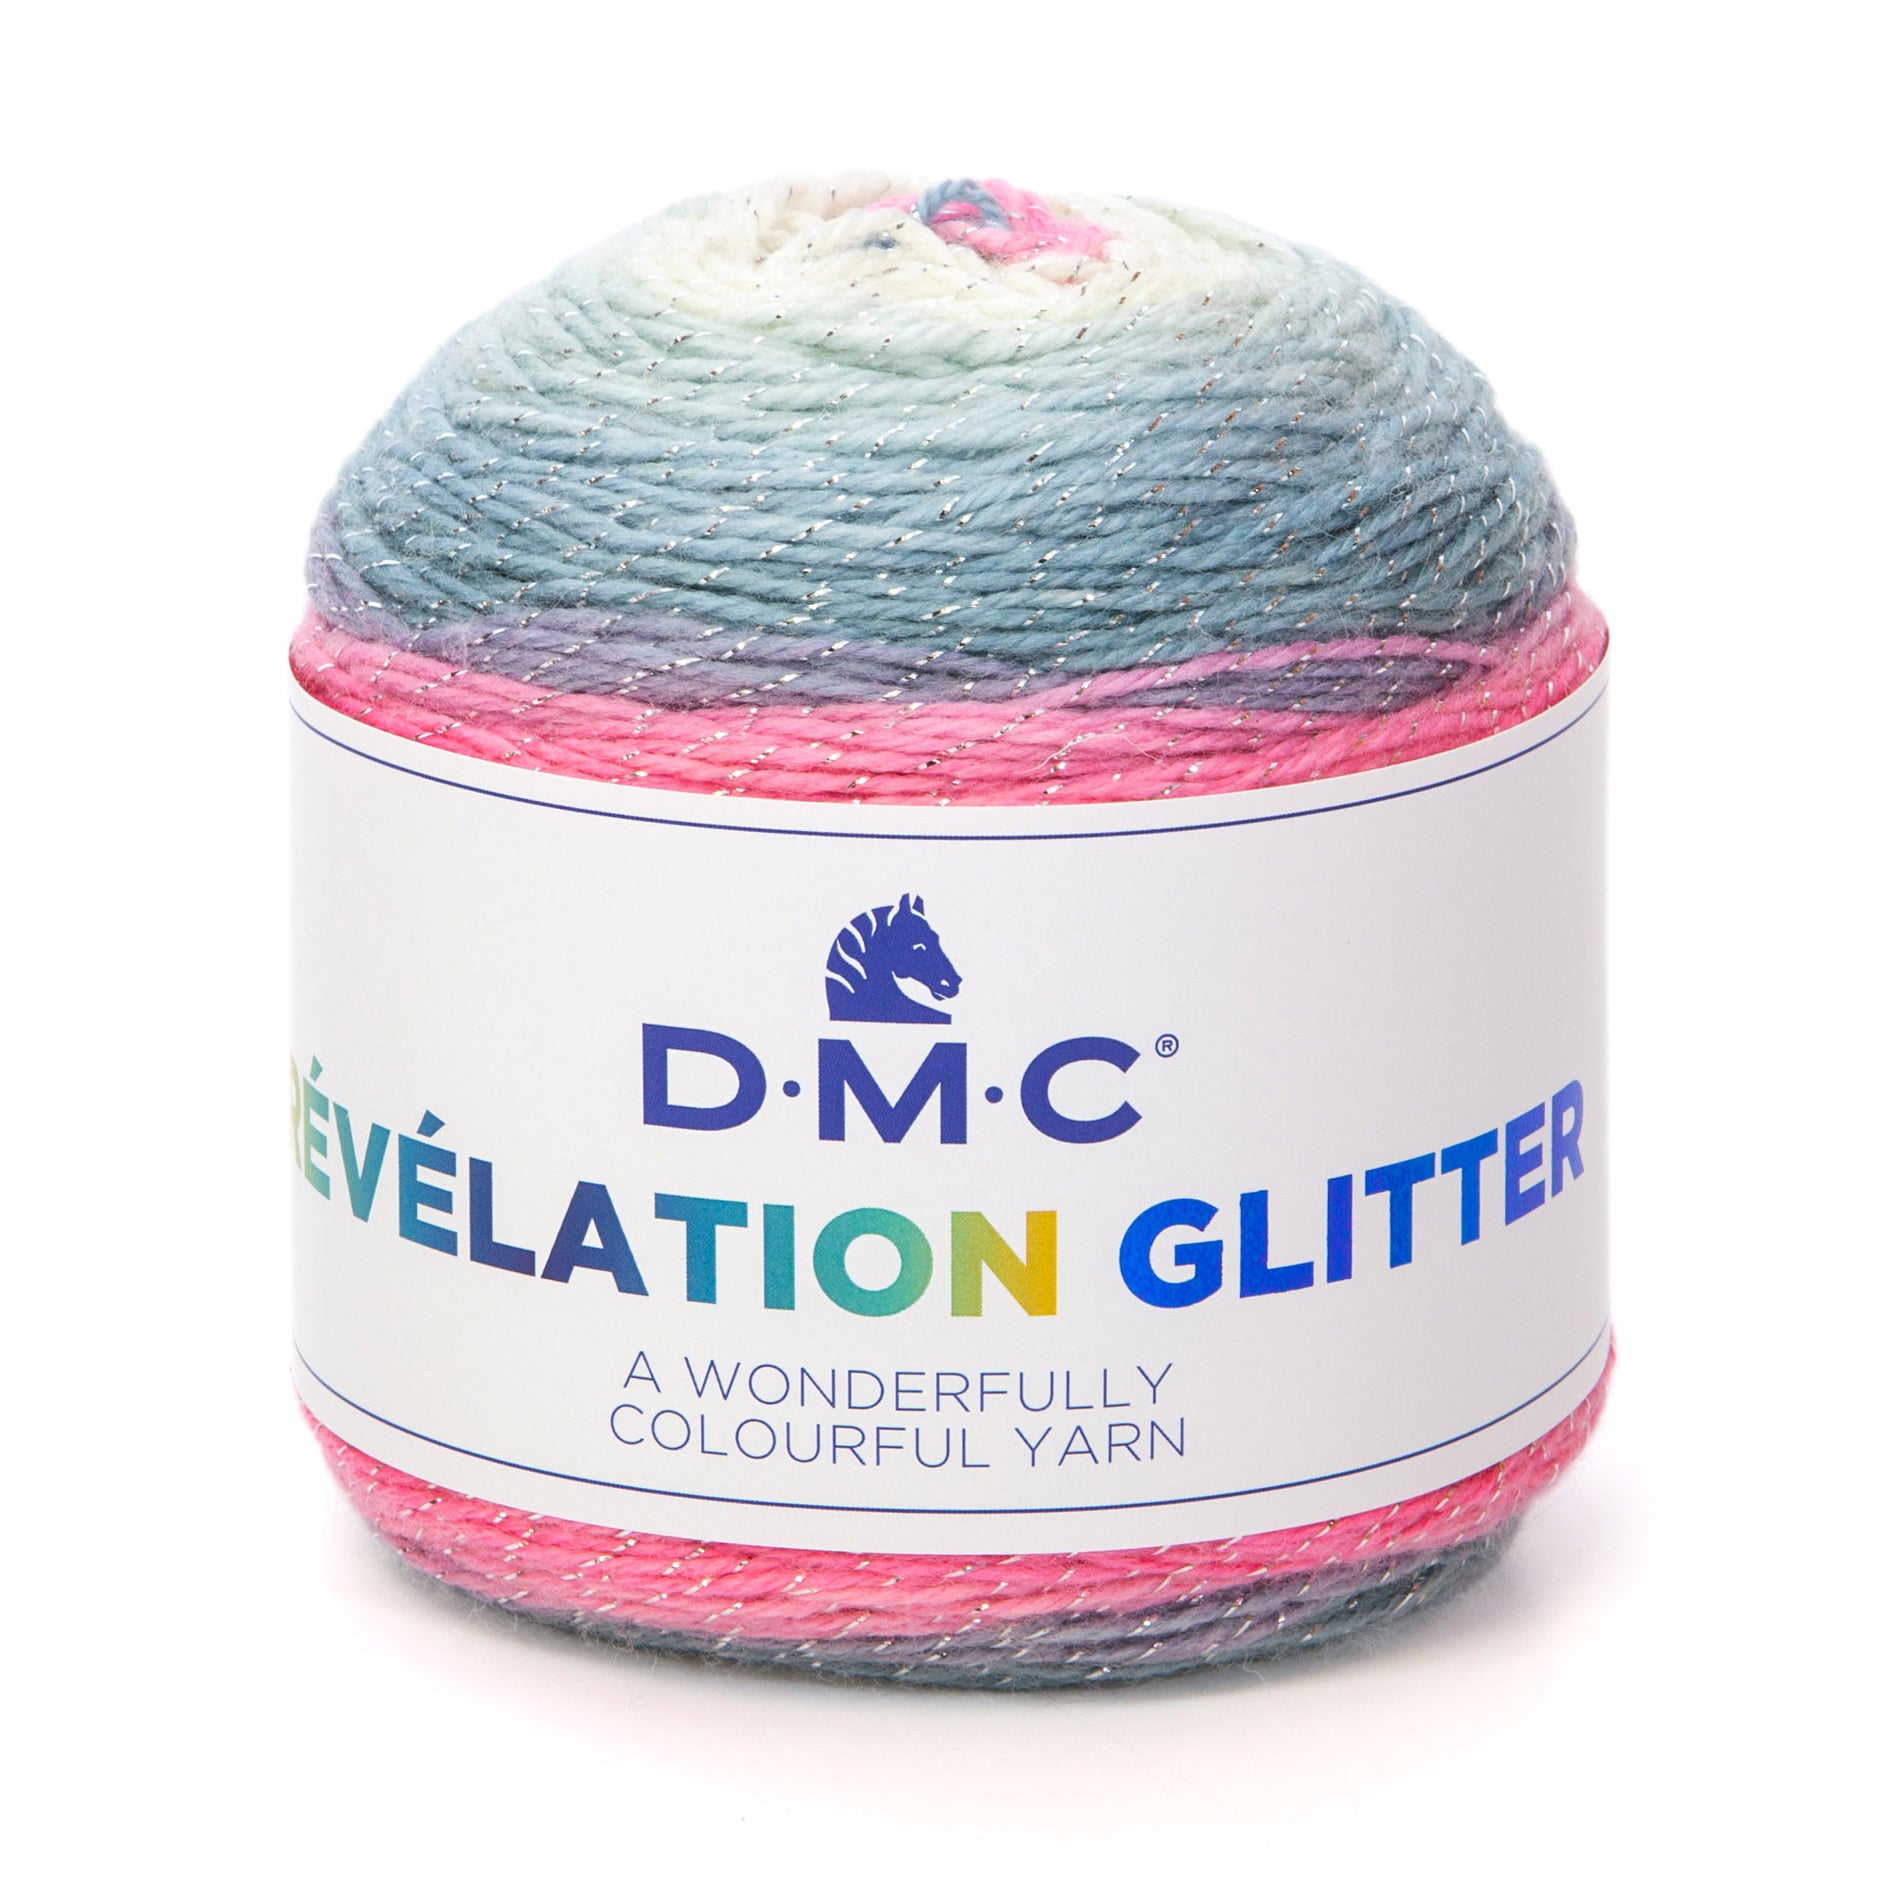 DMC Révélation Glitter - Multicolor wool with a touch of glitter